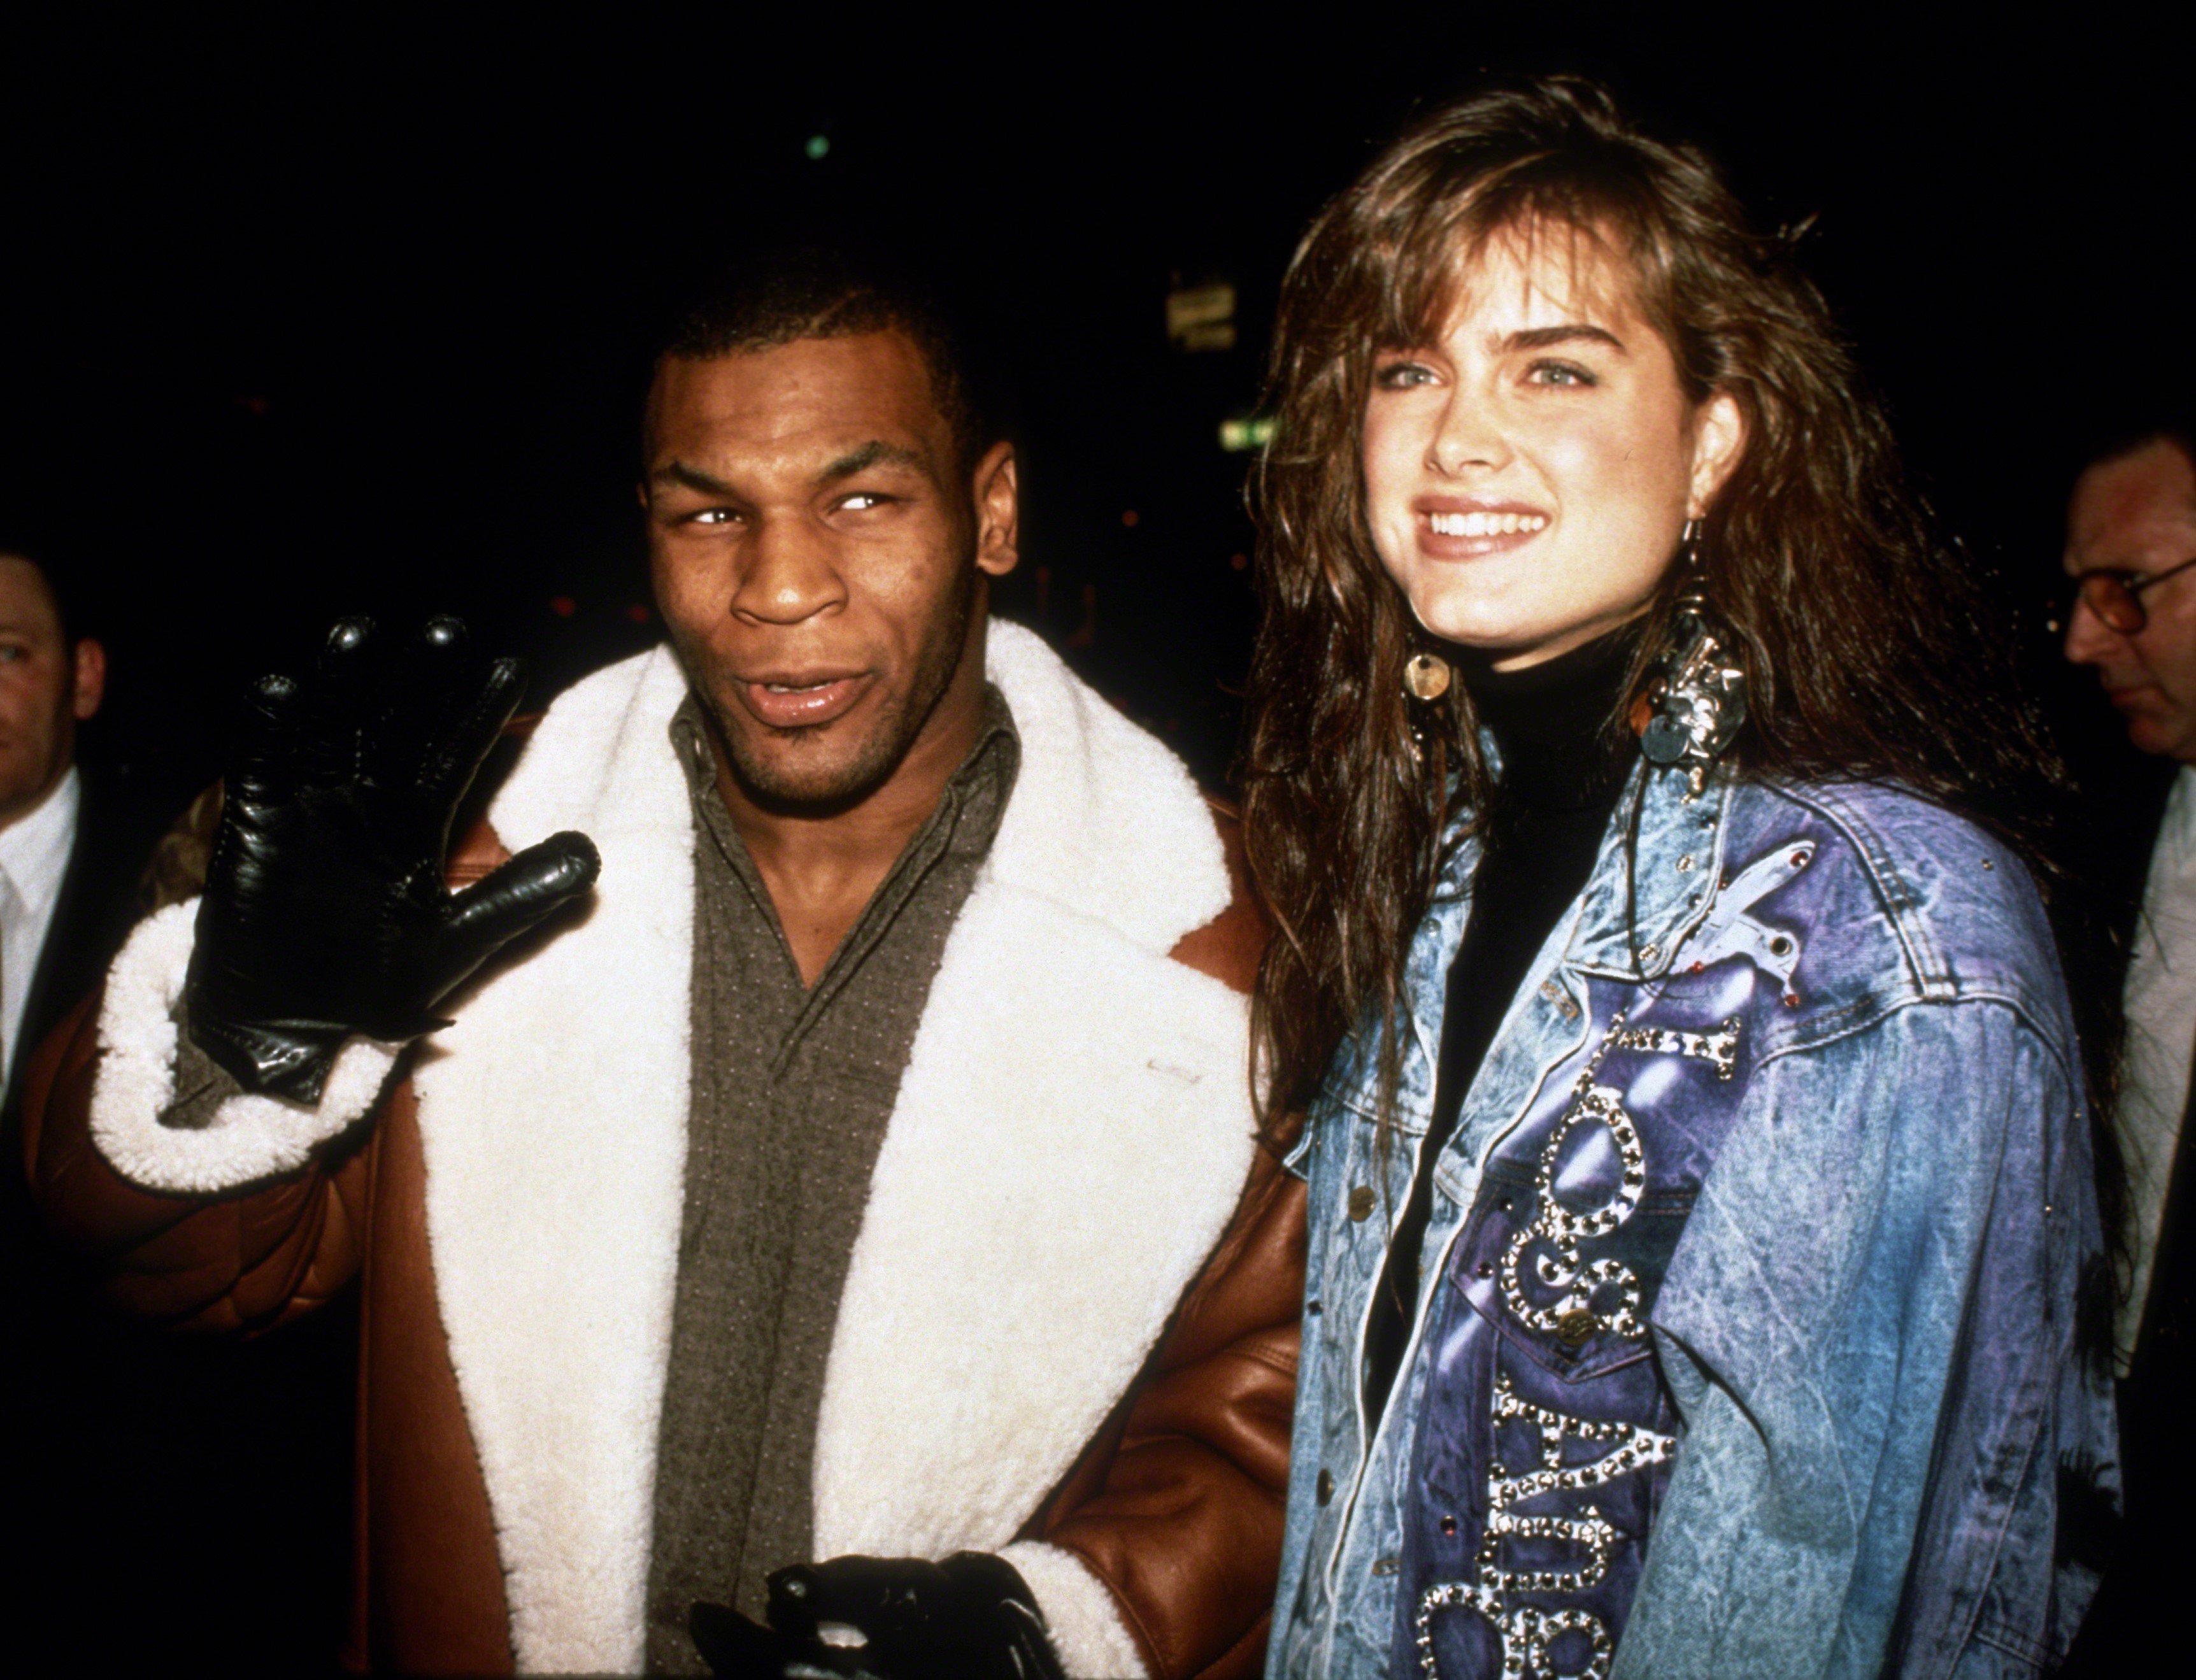 Boxer Mike Tyson and actor Brooke Shields smiling for a photo together in New York City in 1998